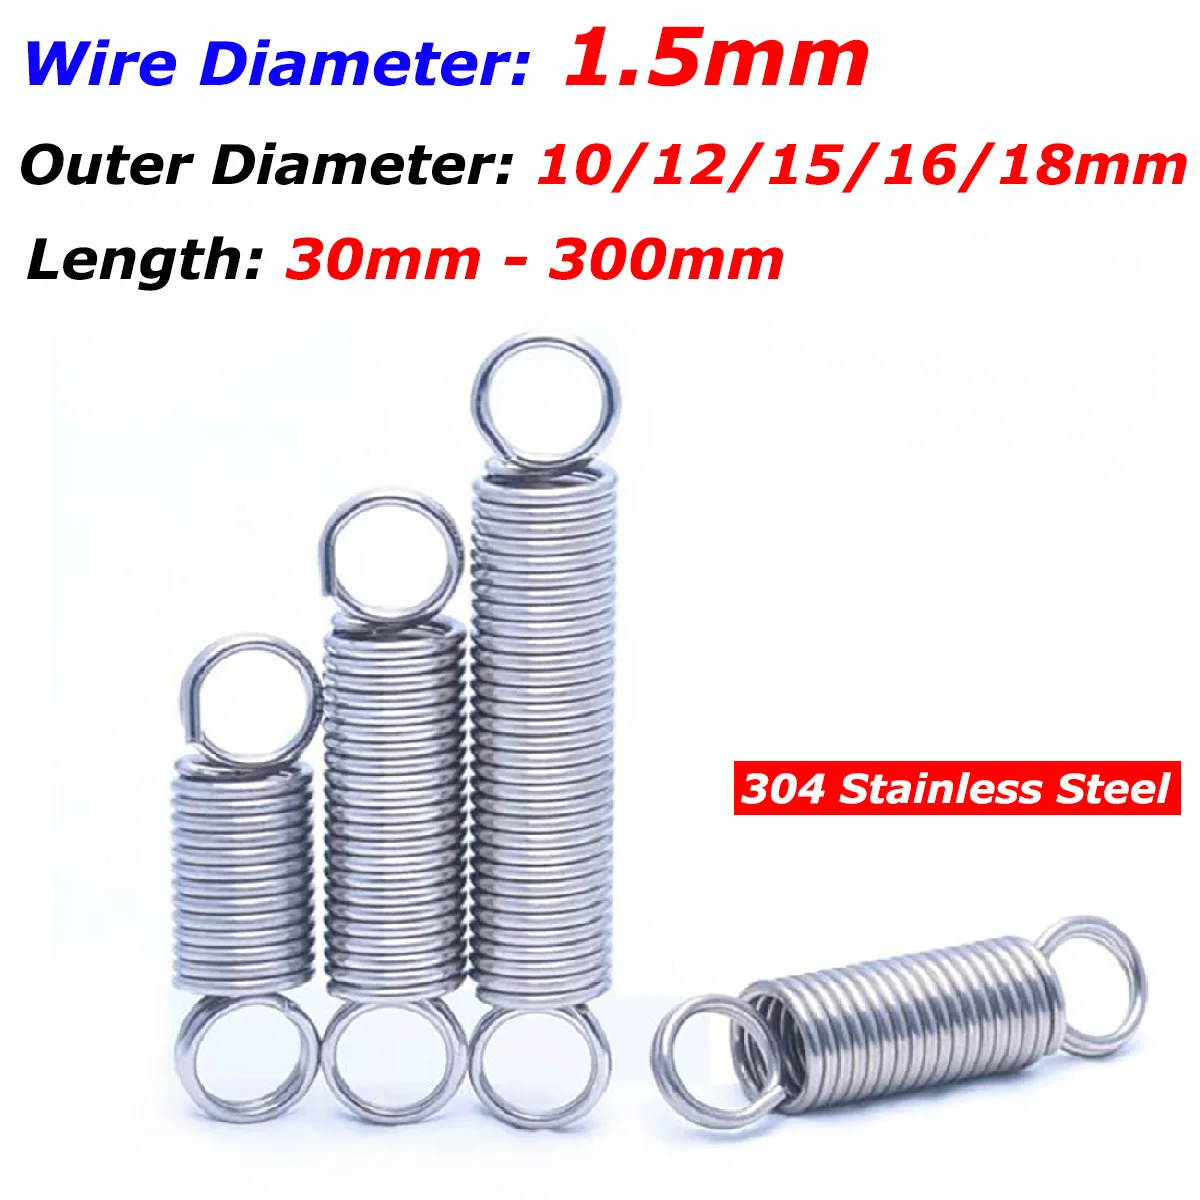 

1.5mm Wire Dia 304 Stainless Steel Tension Spring Ring Hook Extension Spring Pullback Spring OD 10/12/15/16/18mm Length 30-300mm